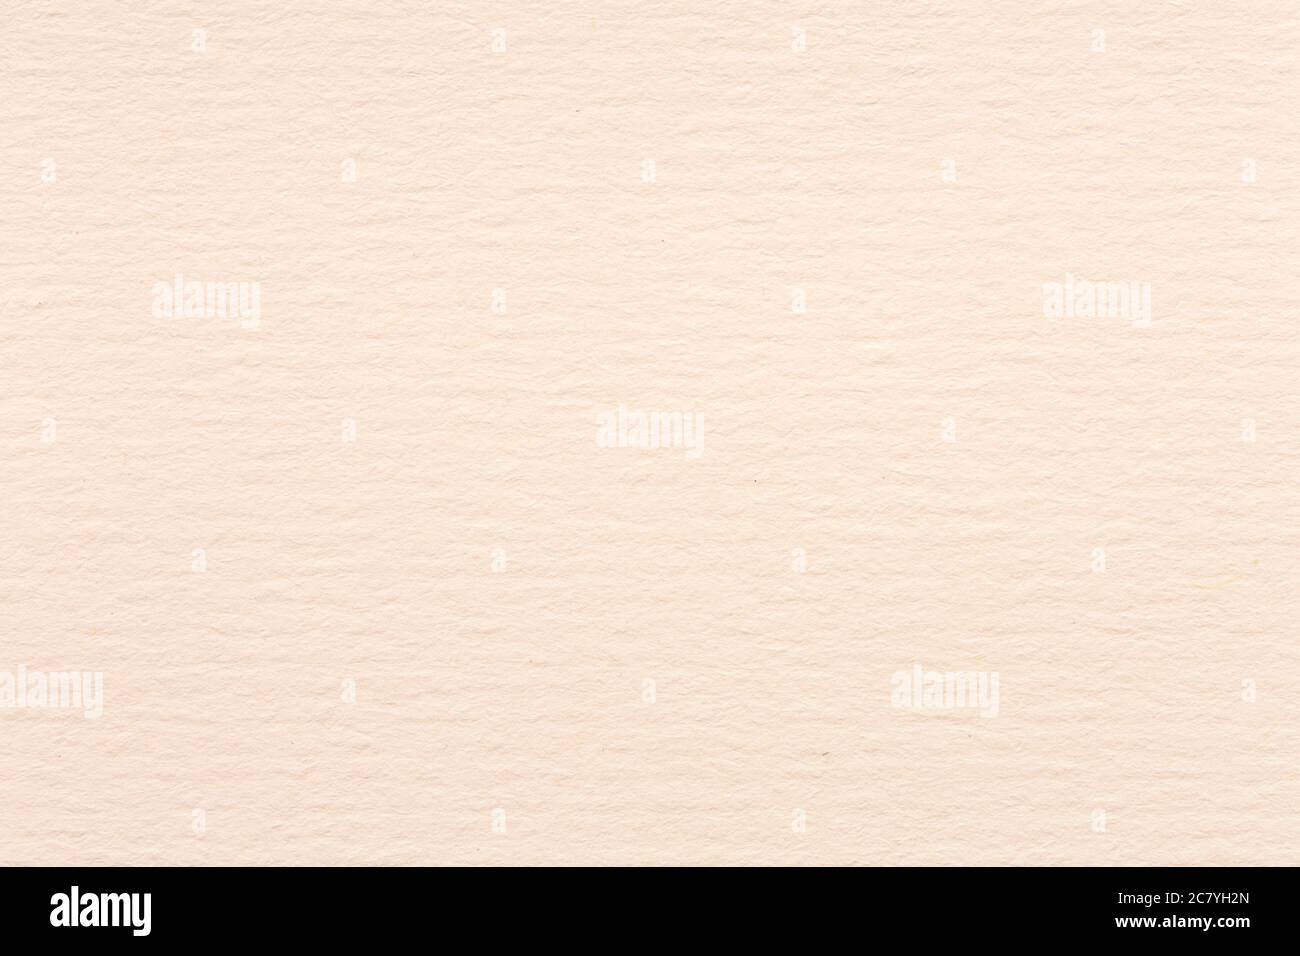 Abstract cream background of beige color on white canvas linen